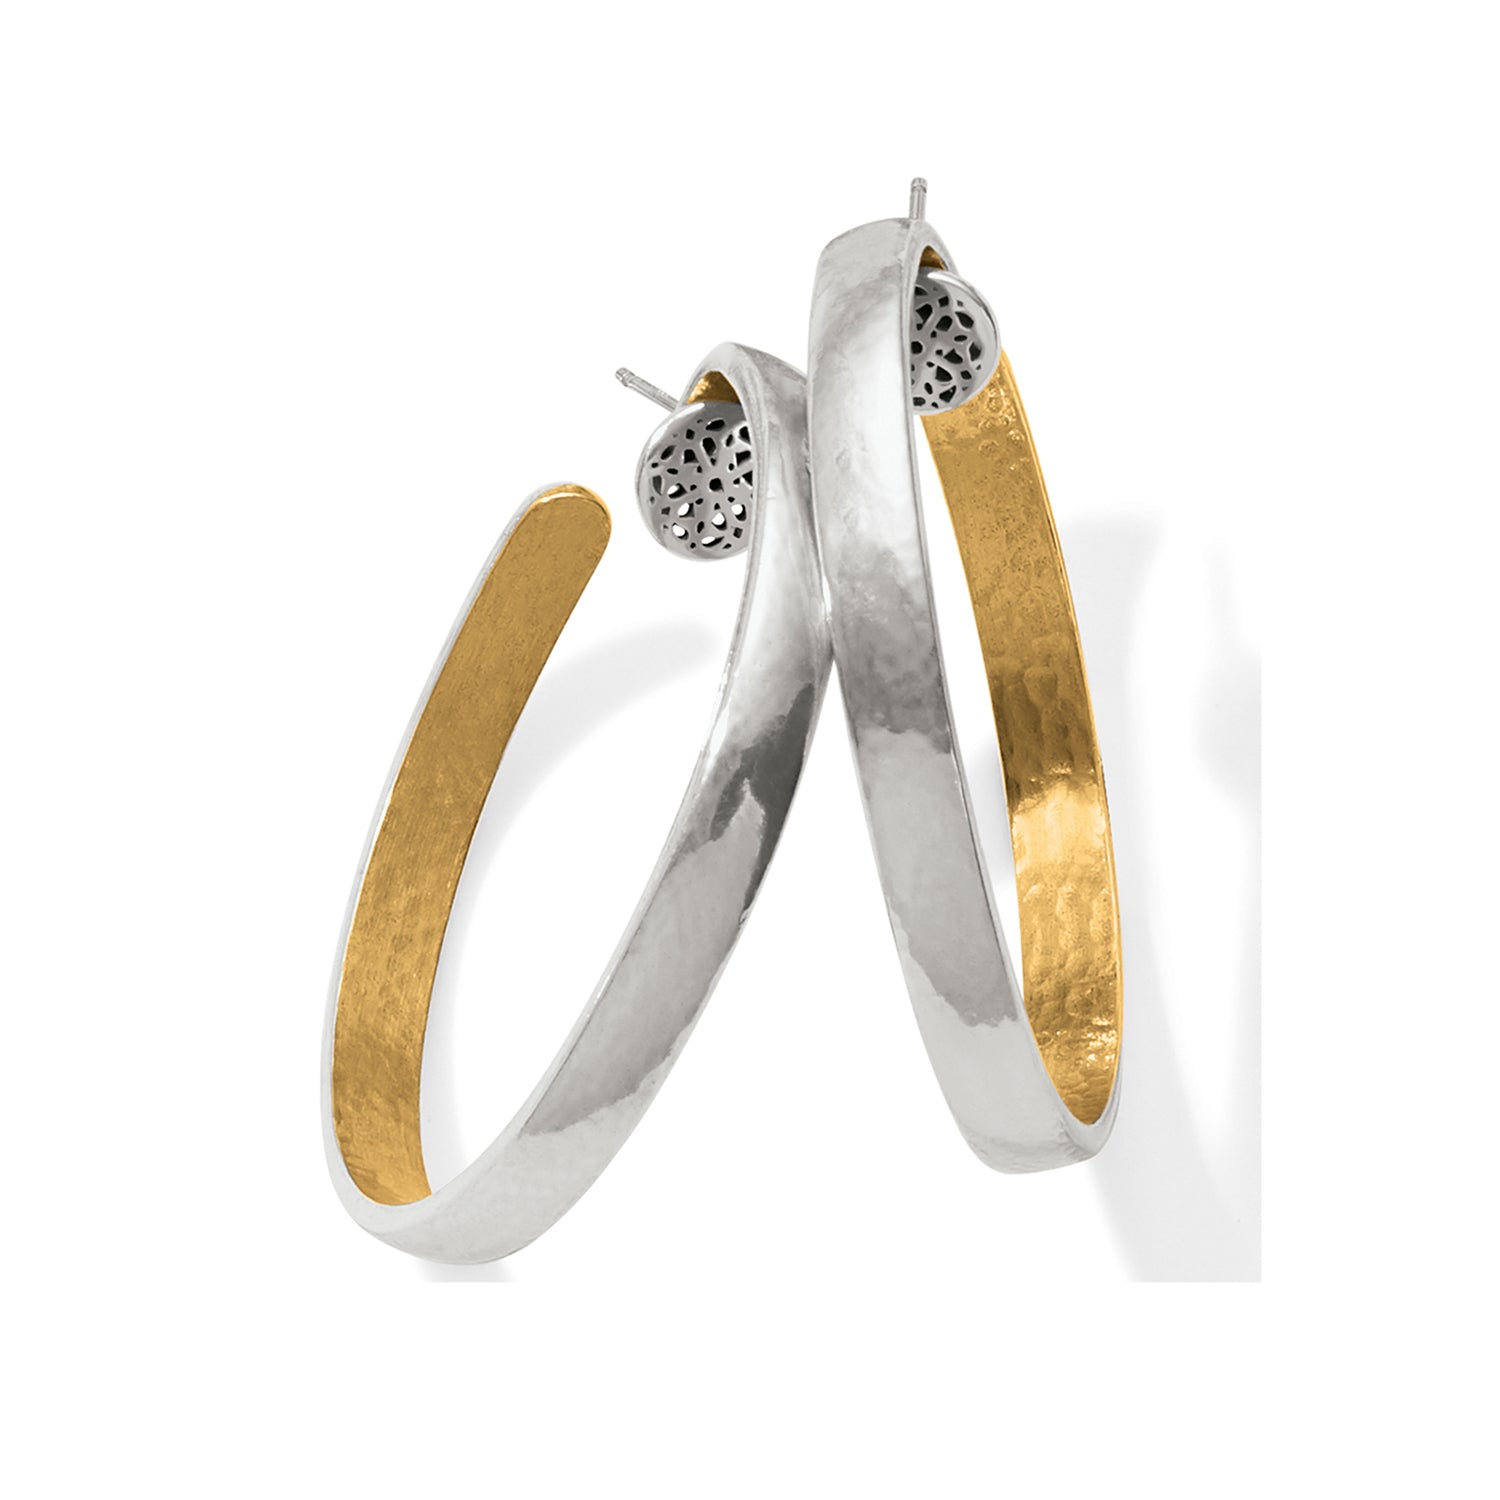 Ferrara Entrata Medium Hoop Earrings by Brighton with softly hammered details and golden accents is modern art-to-wear, silver outside/gold inside. Shop at The Painted Cottage in Edgewater MD.